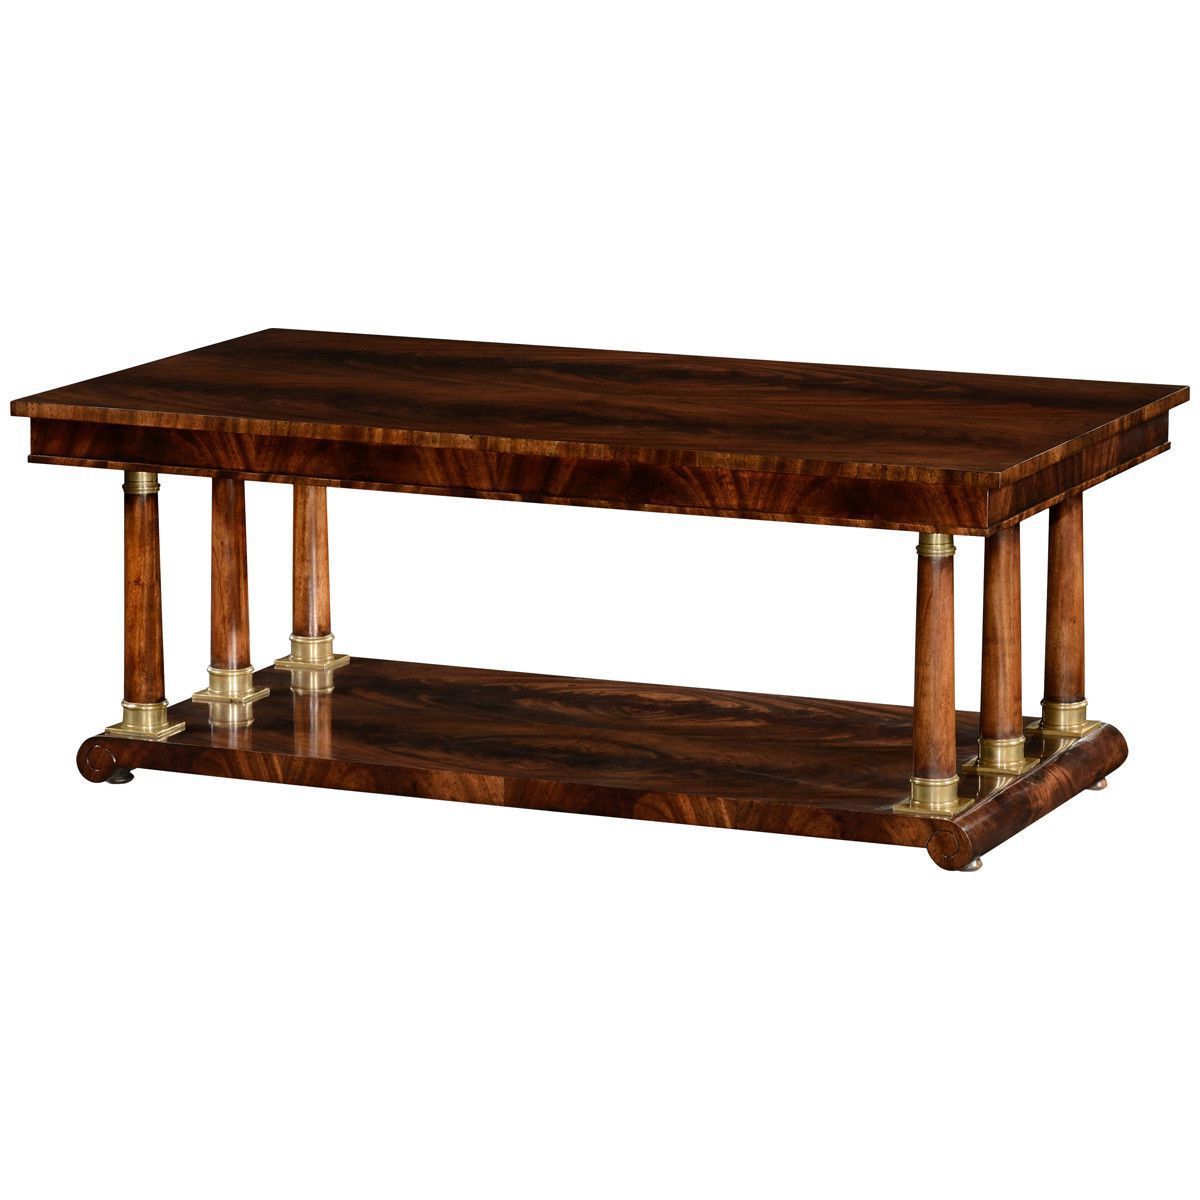 Jonathan Charles Mahogany Biedermeier Style Rectangular Coffee Table Inside Favorite Rectangular Coffee Tables With Pedestal Bases (View 14 of 15)